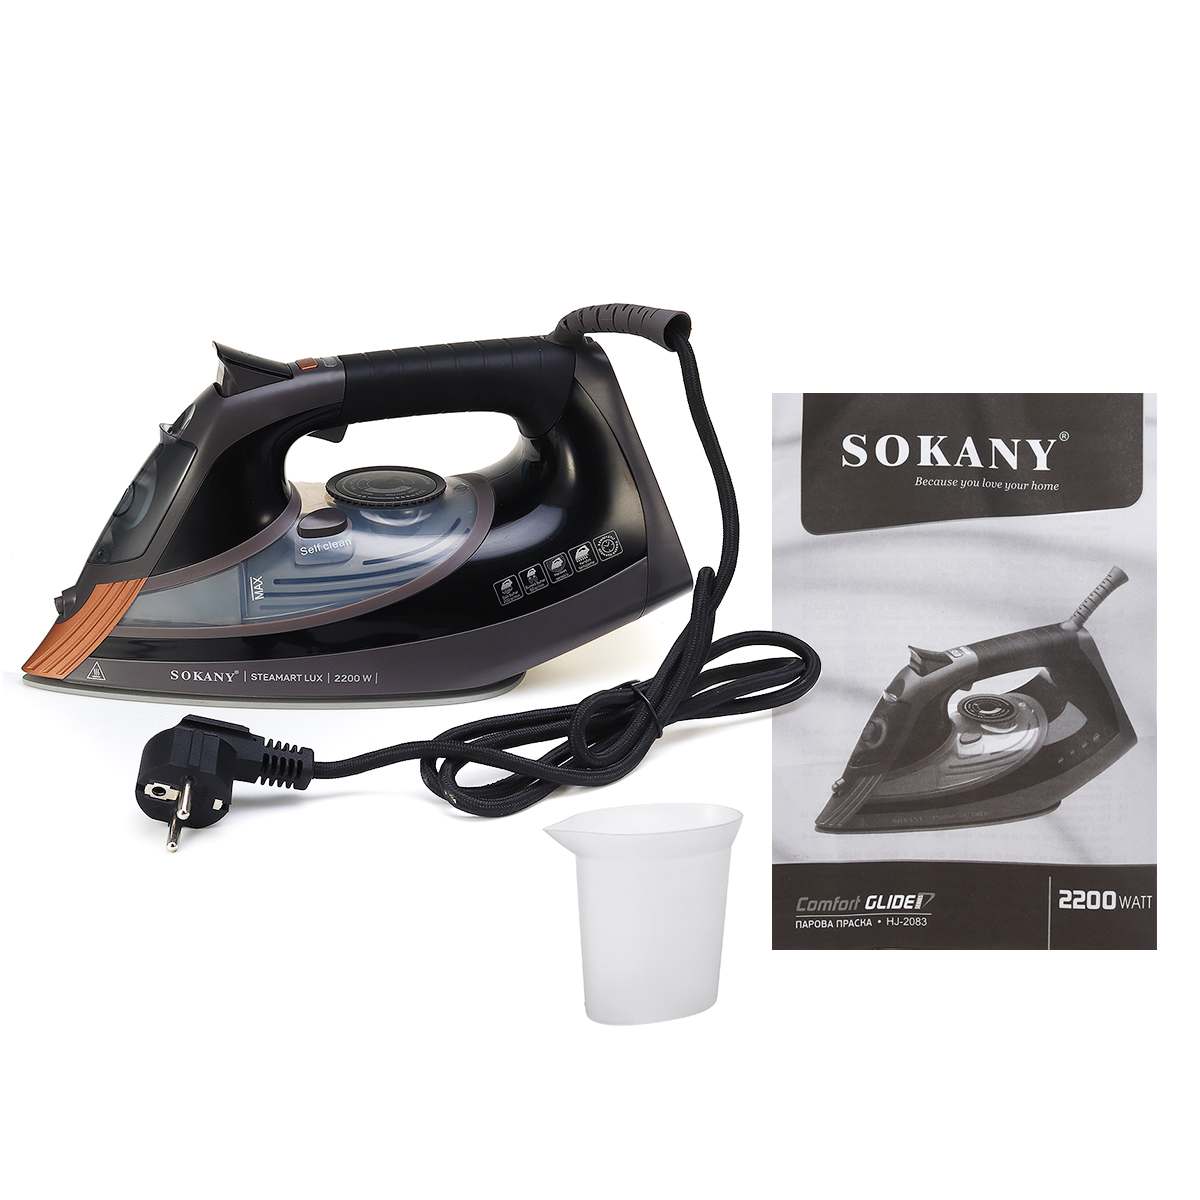 2200W 220V Electric Irons Garment Iron Adjustable Steam Irons Clothing Laundry Appliance Multifunction Clothes Irons Flatiron